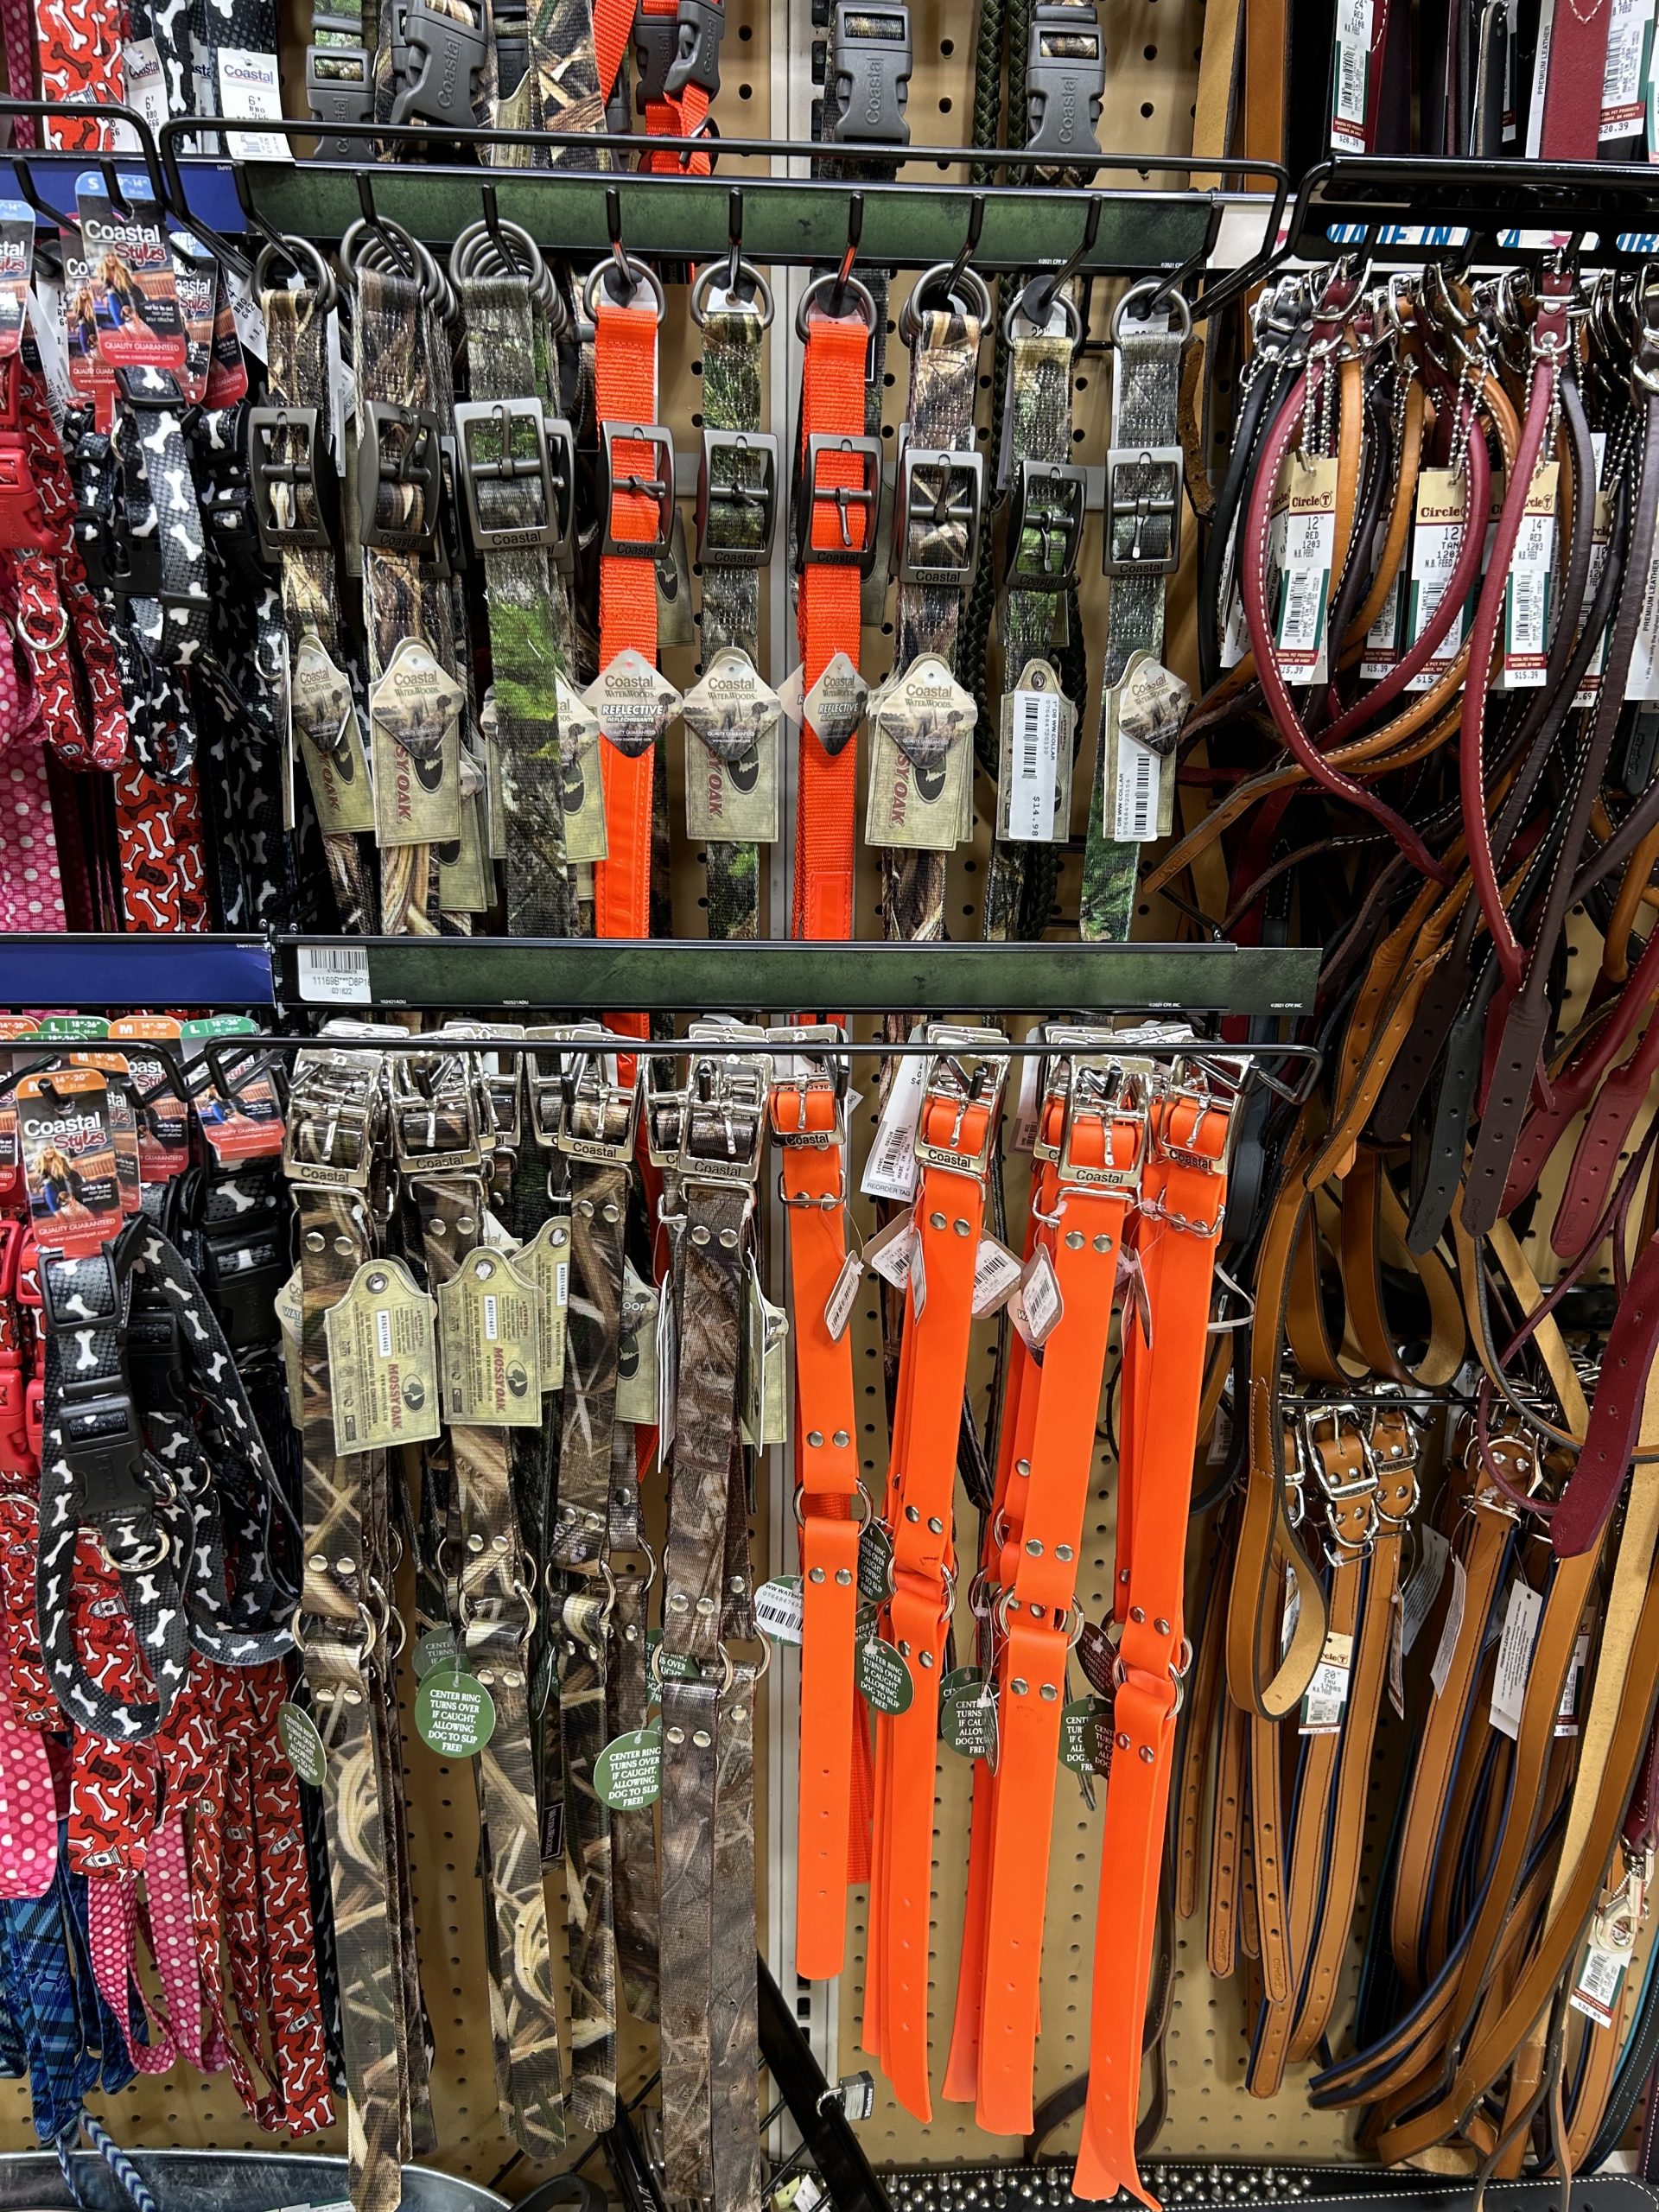 Water proof and hunter approved dog collars and leashes